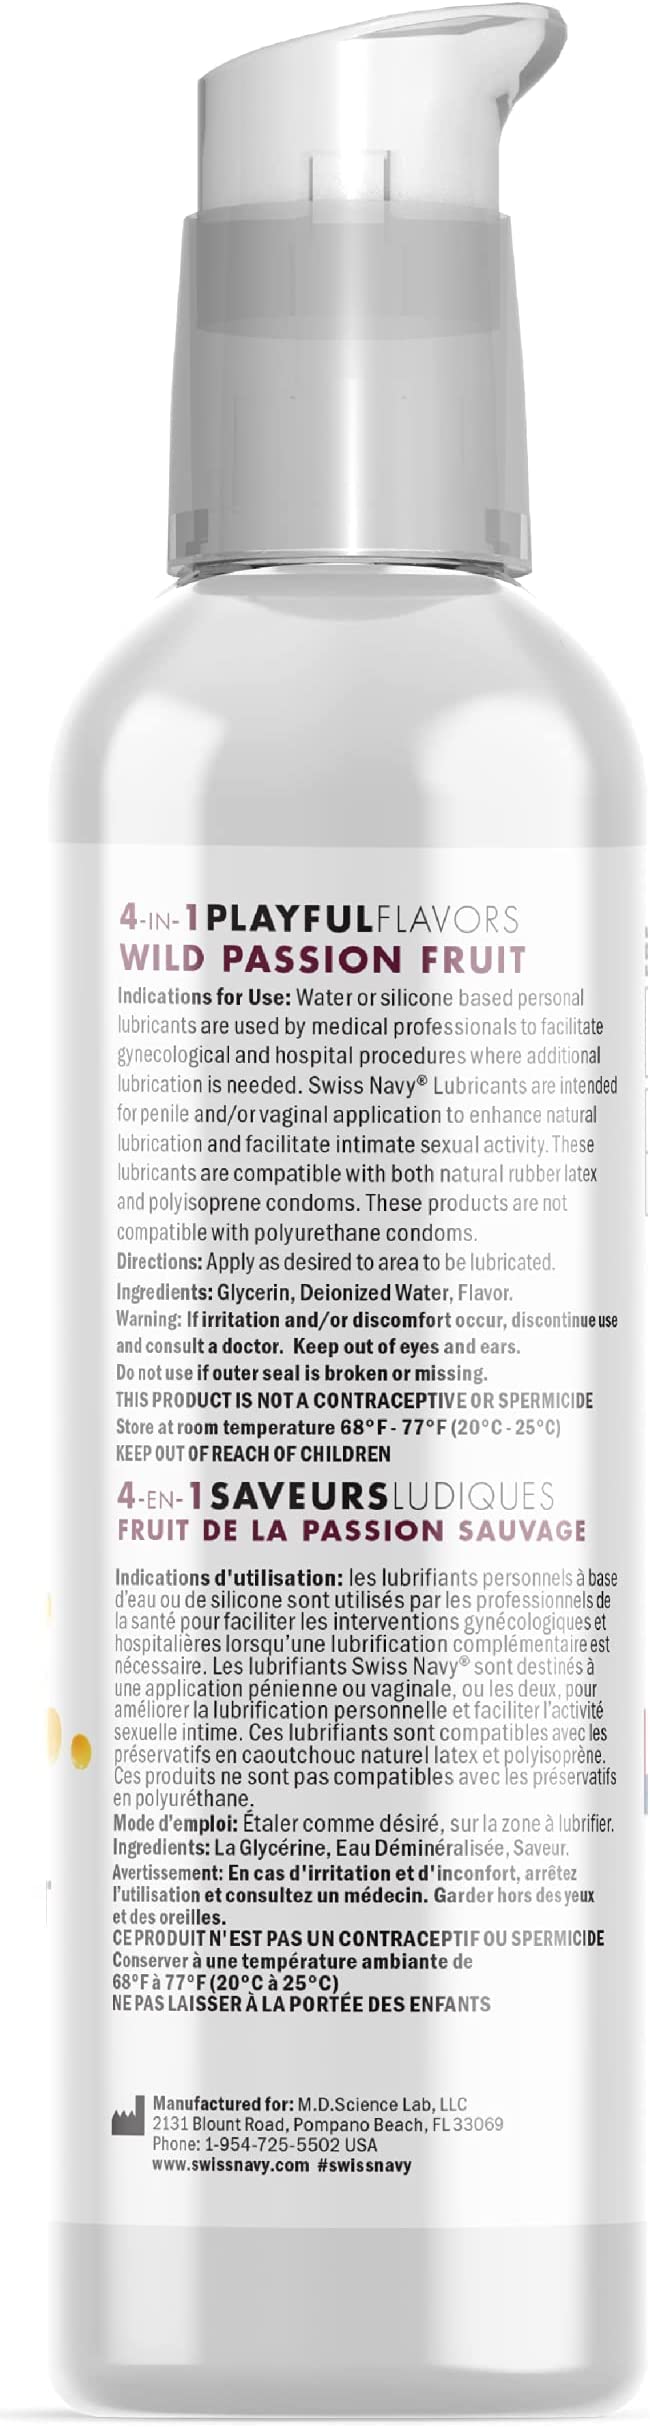 Swiss Navy Lubricant Playful Flavours 4 In 1 Wild Passion Fruit 4oz $24.95AUD Duchess and Daisy. 4-in-1 Playful Flavors promise playful pleasure in all its forms!  Wild Passion Fruit delivers the exotic, sweet flavor and tangy scent of fresh passion fruit to arouse your senses—and your taste buds! Apply liberally to enjoy a flavorful passion fruit experience.